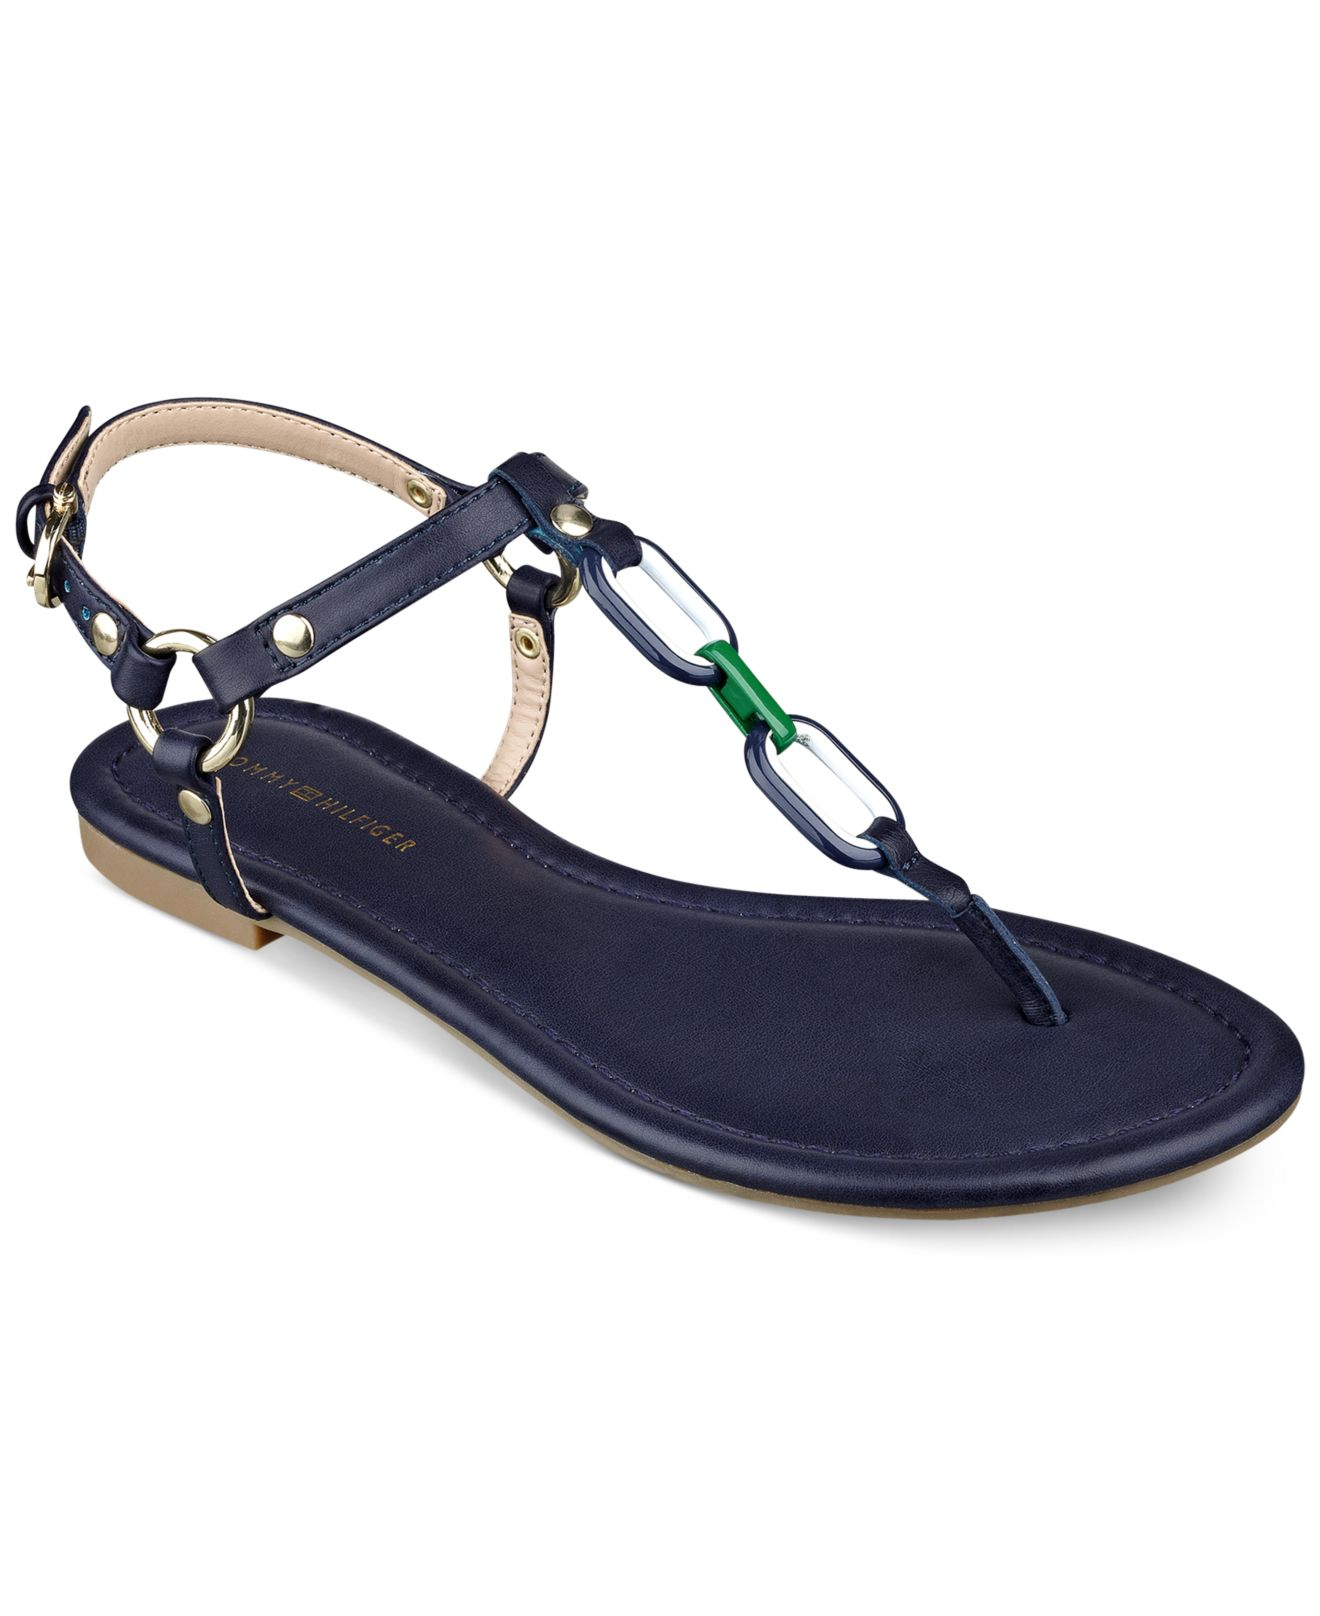 Lyst - Tommy Hilfiger Shelley Flat Thong Sandals in Blue